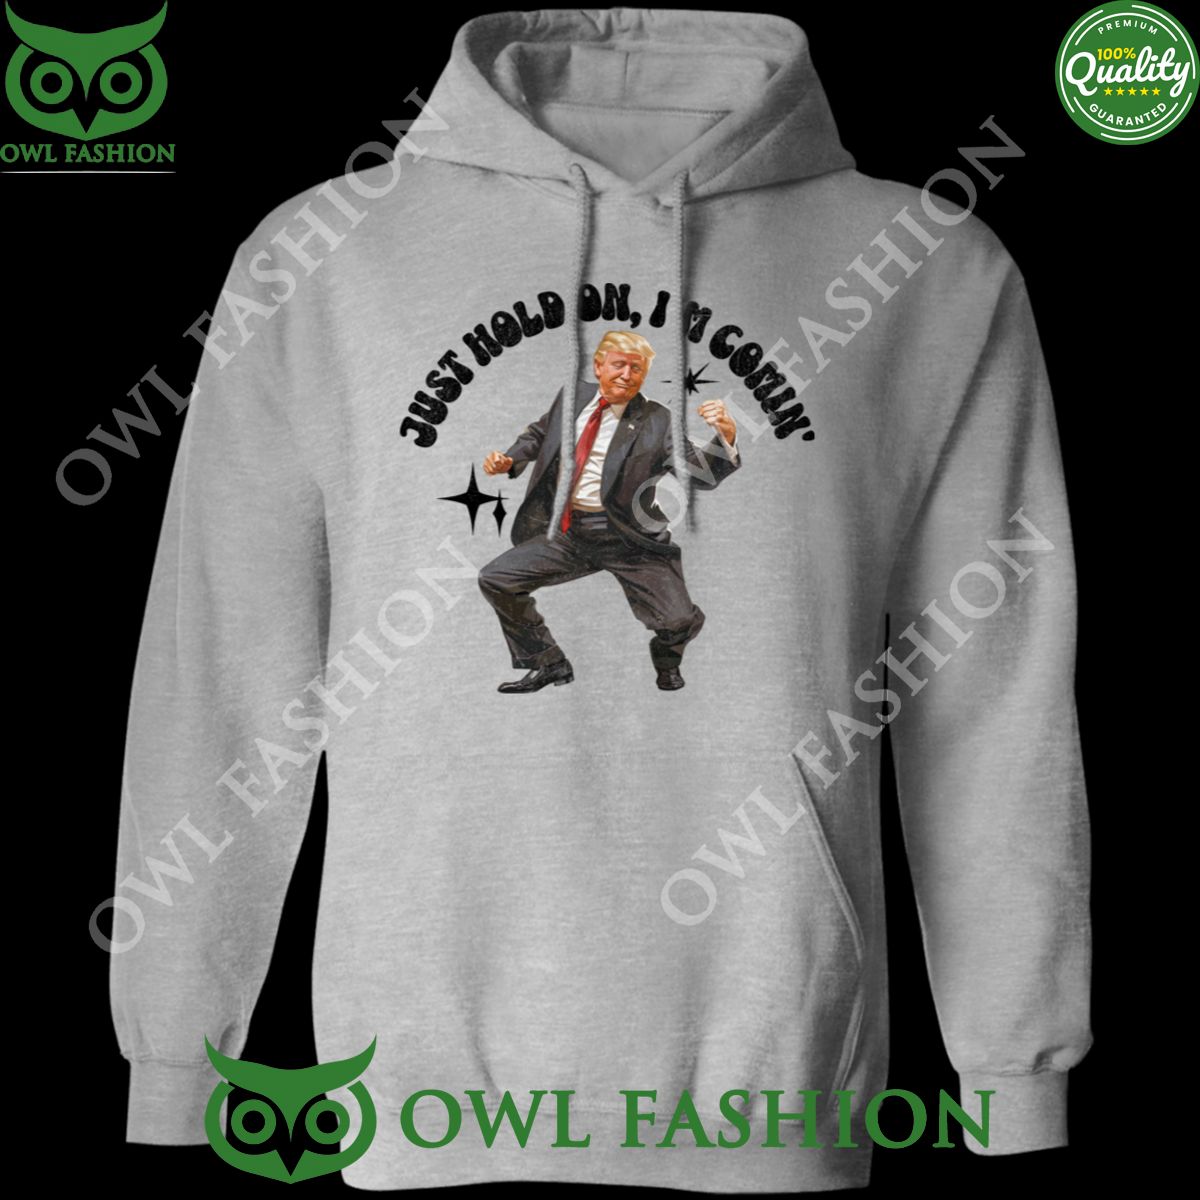 Just Hold On I'm Comin' Trump 2D Shirt Hoodie